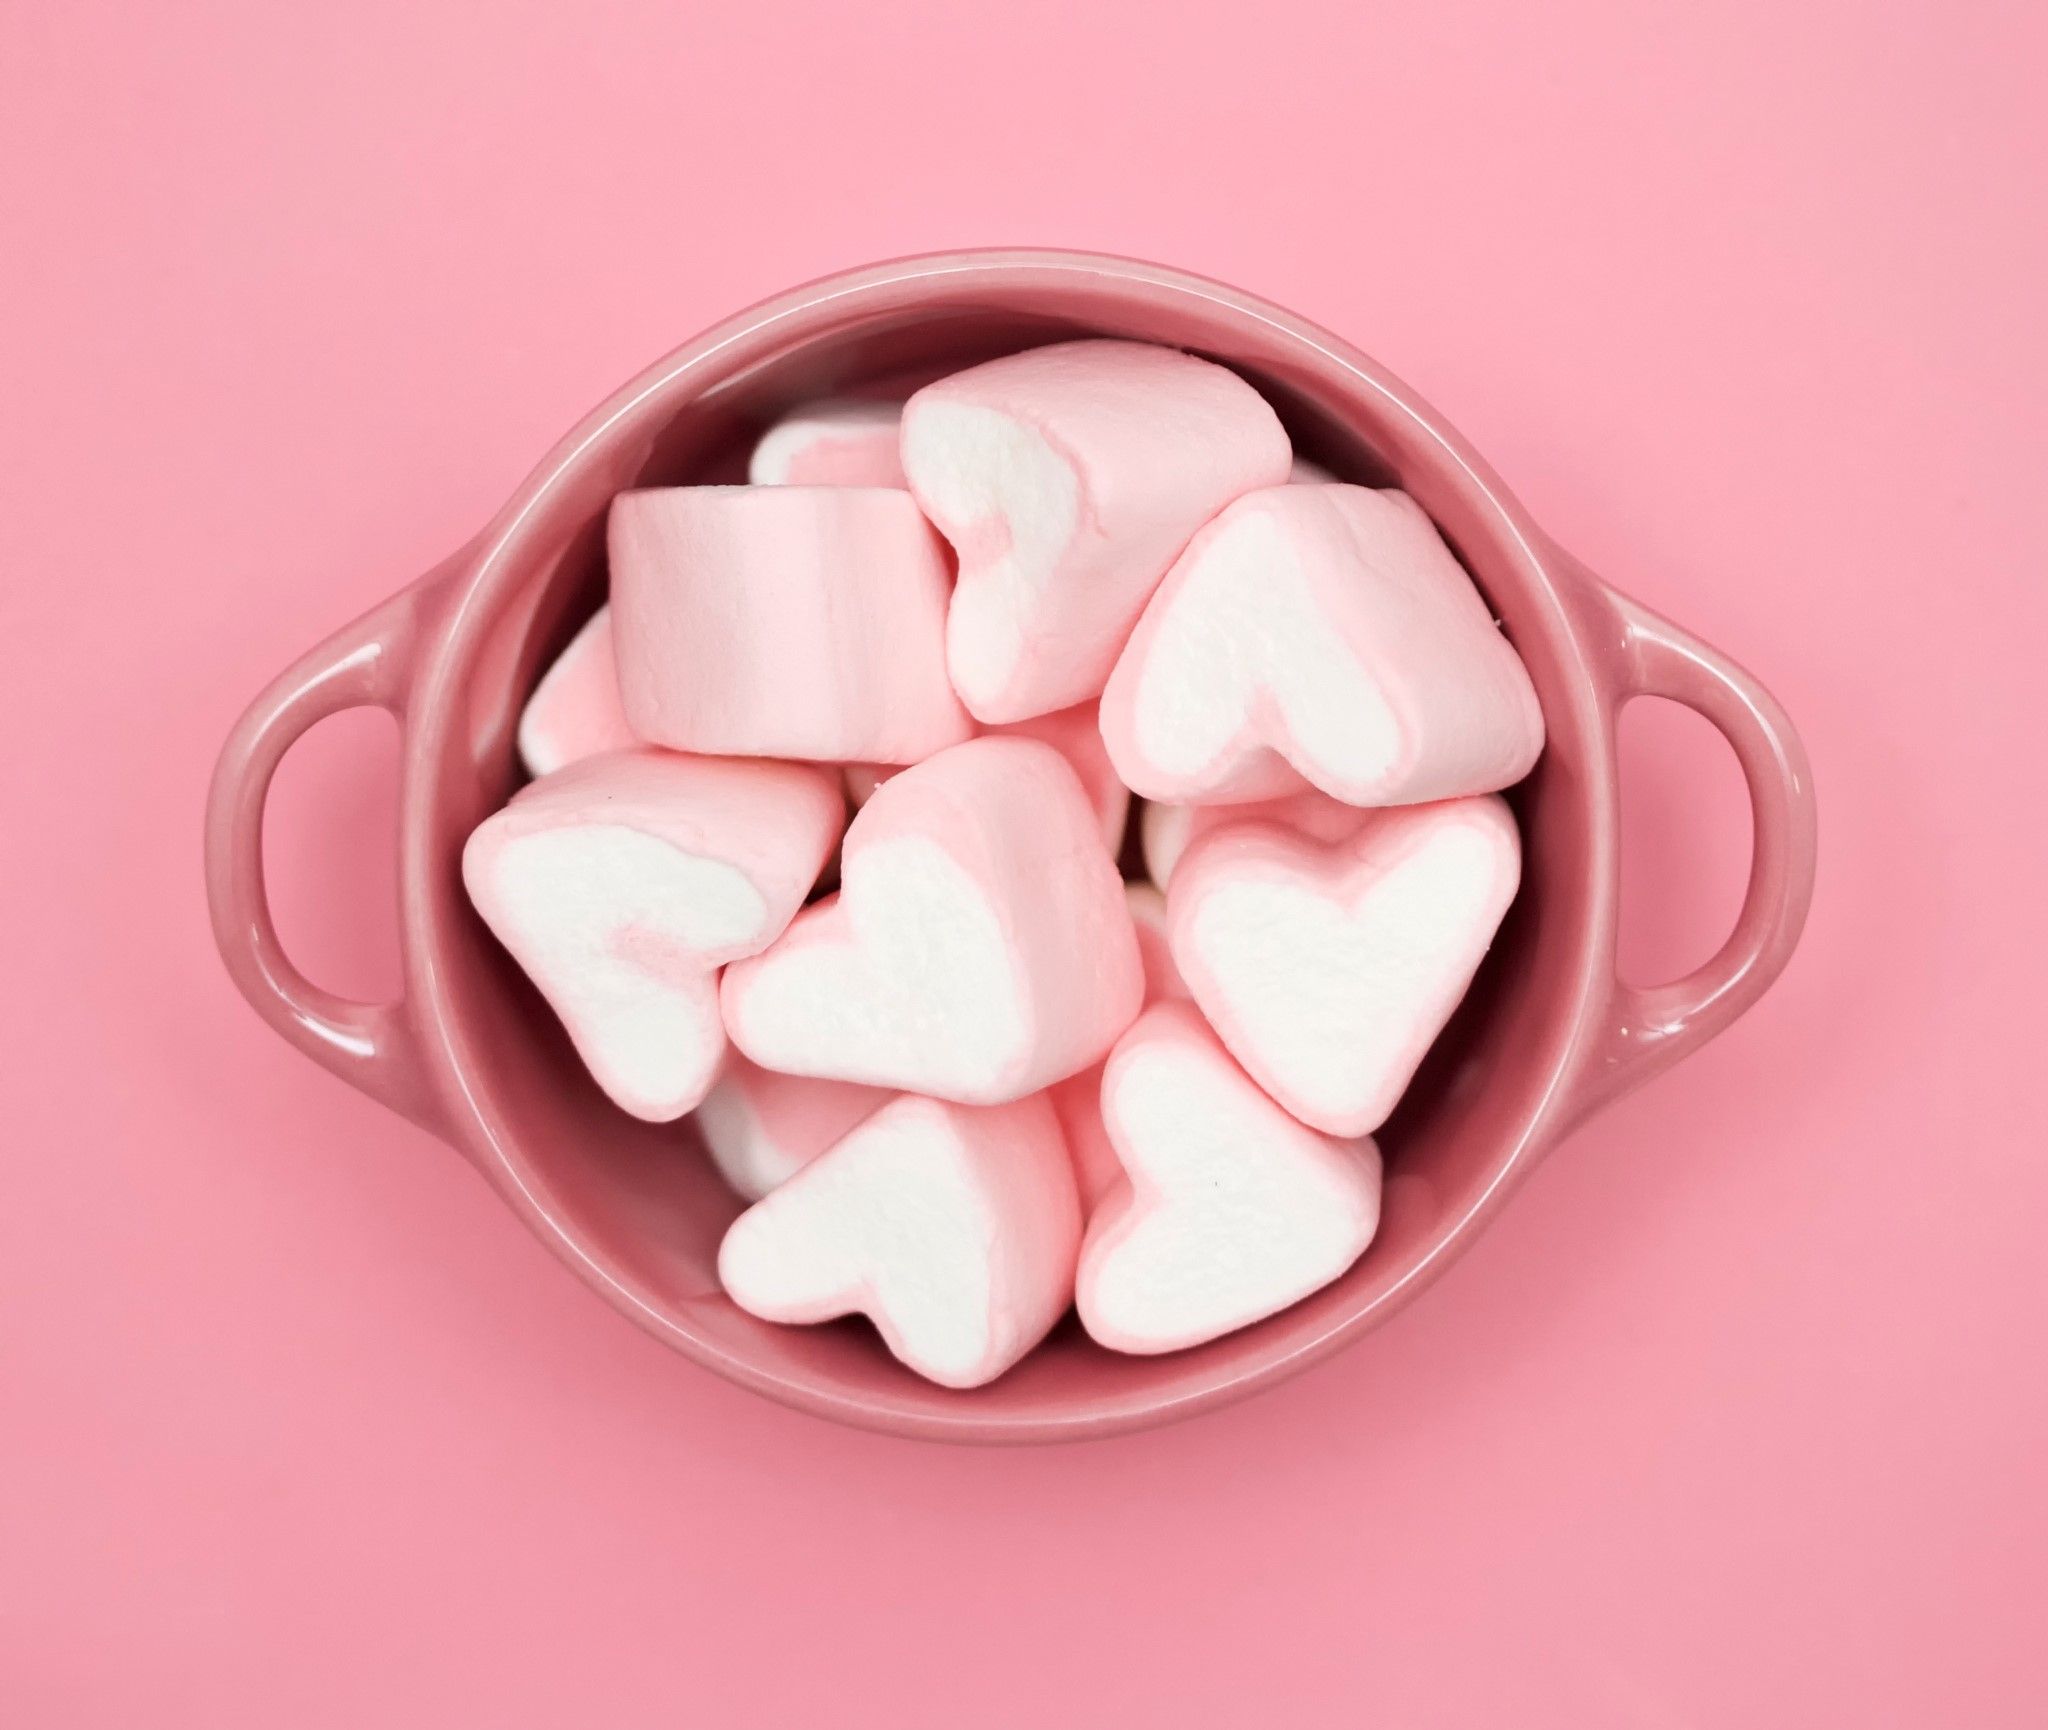 A bowl of marshmallows on pink background - Marshmallows